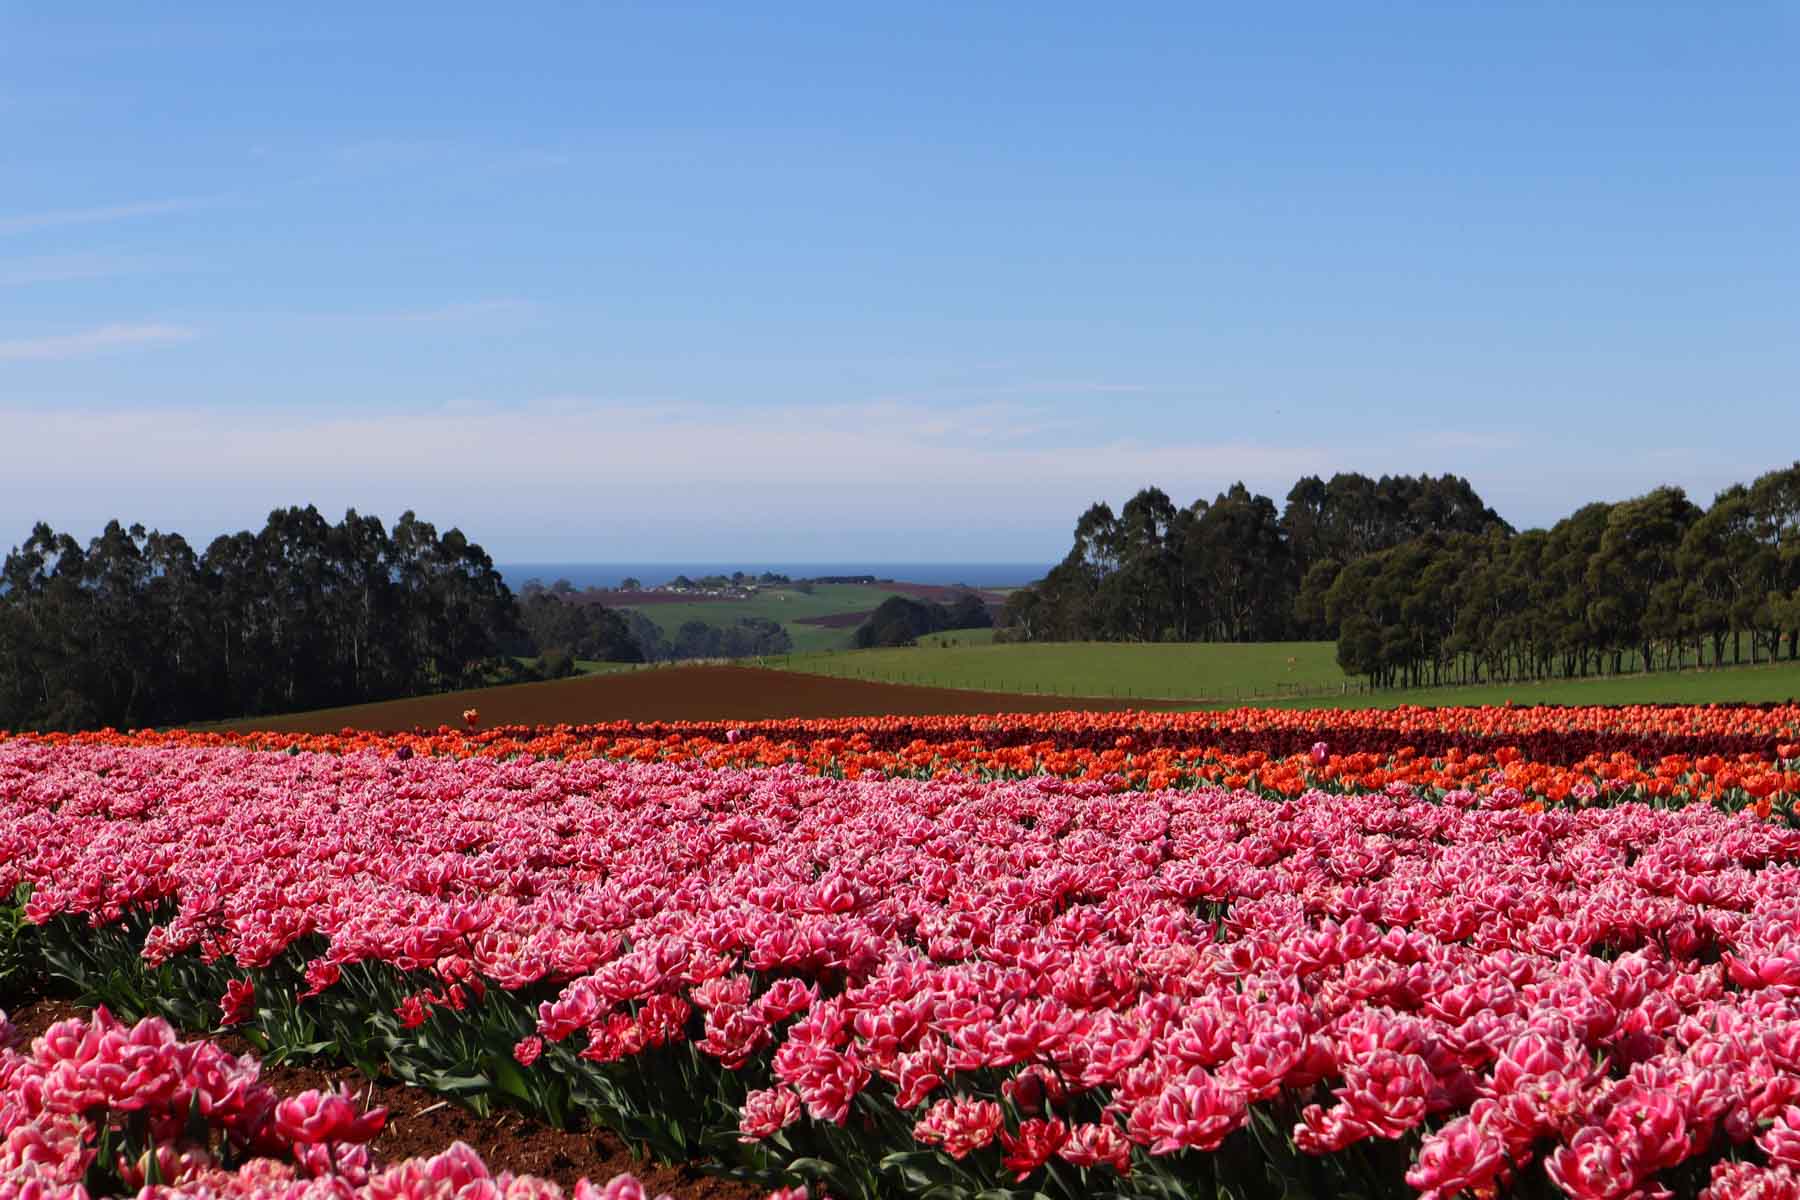 Immerse in North-West Tasmania's beauty with Coastline Tours. Secure your spot on our guided tulip farm tour for vibrant memories.